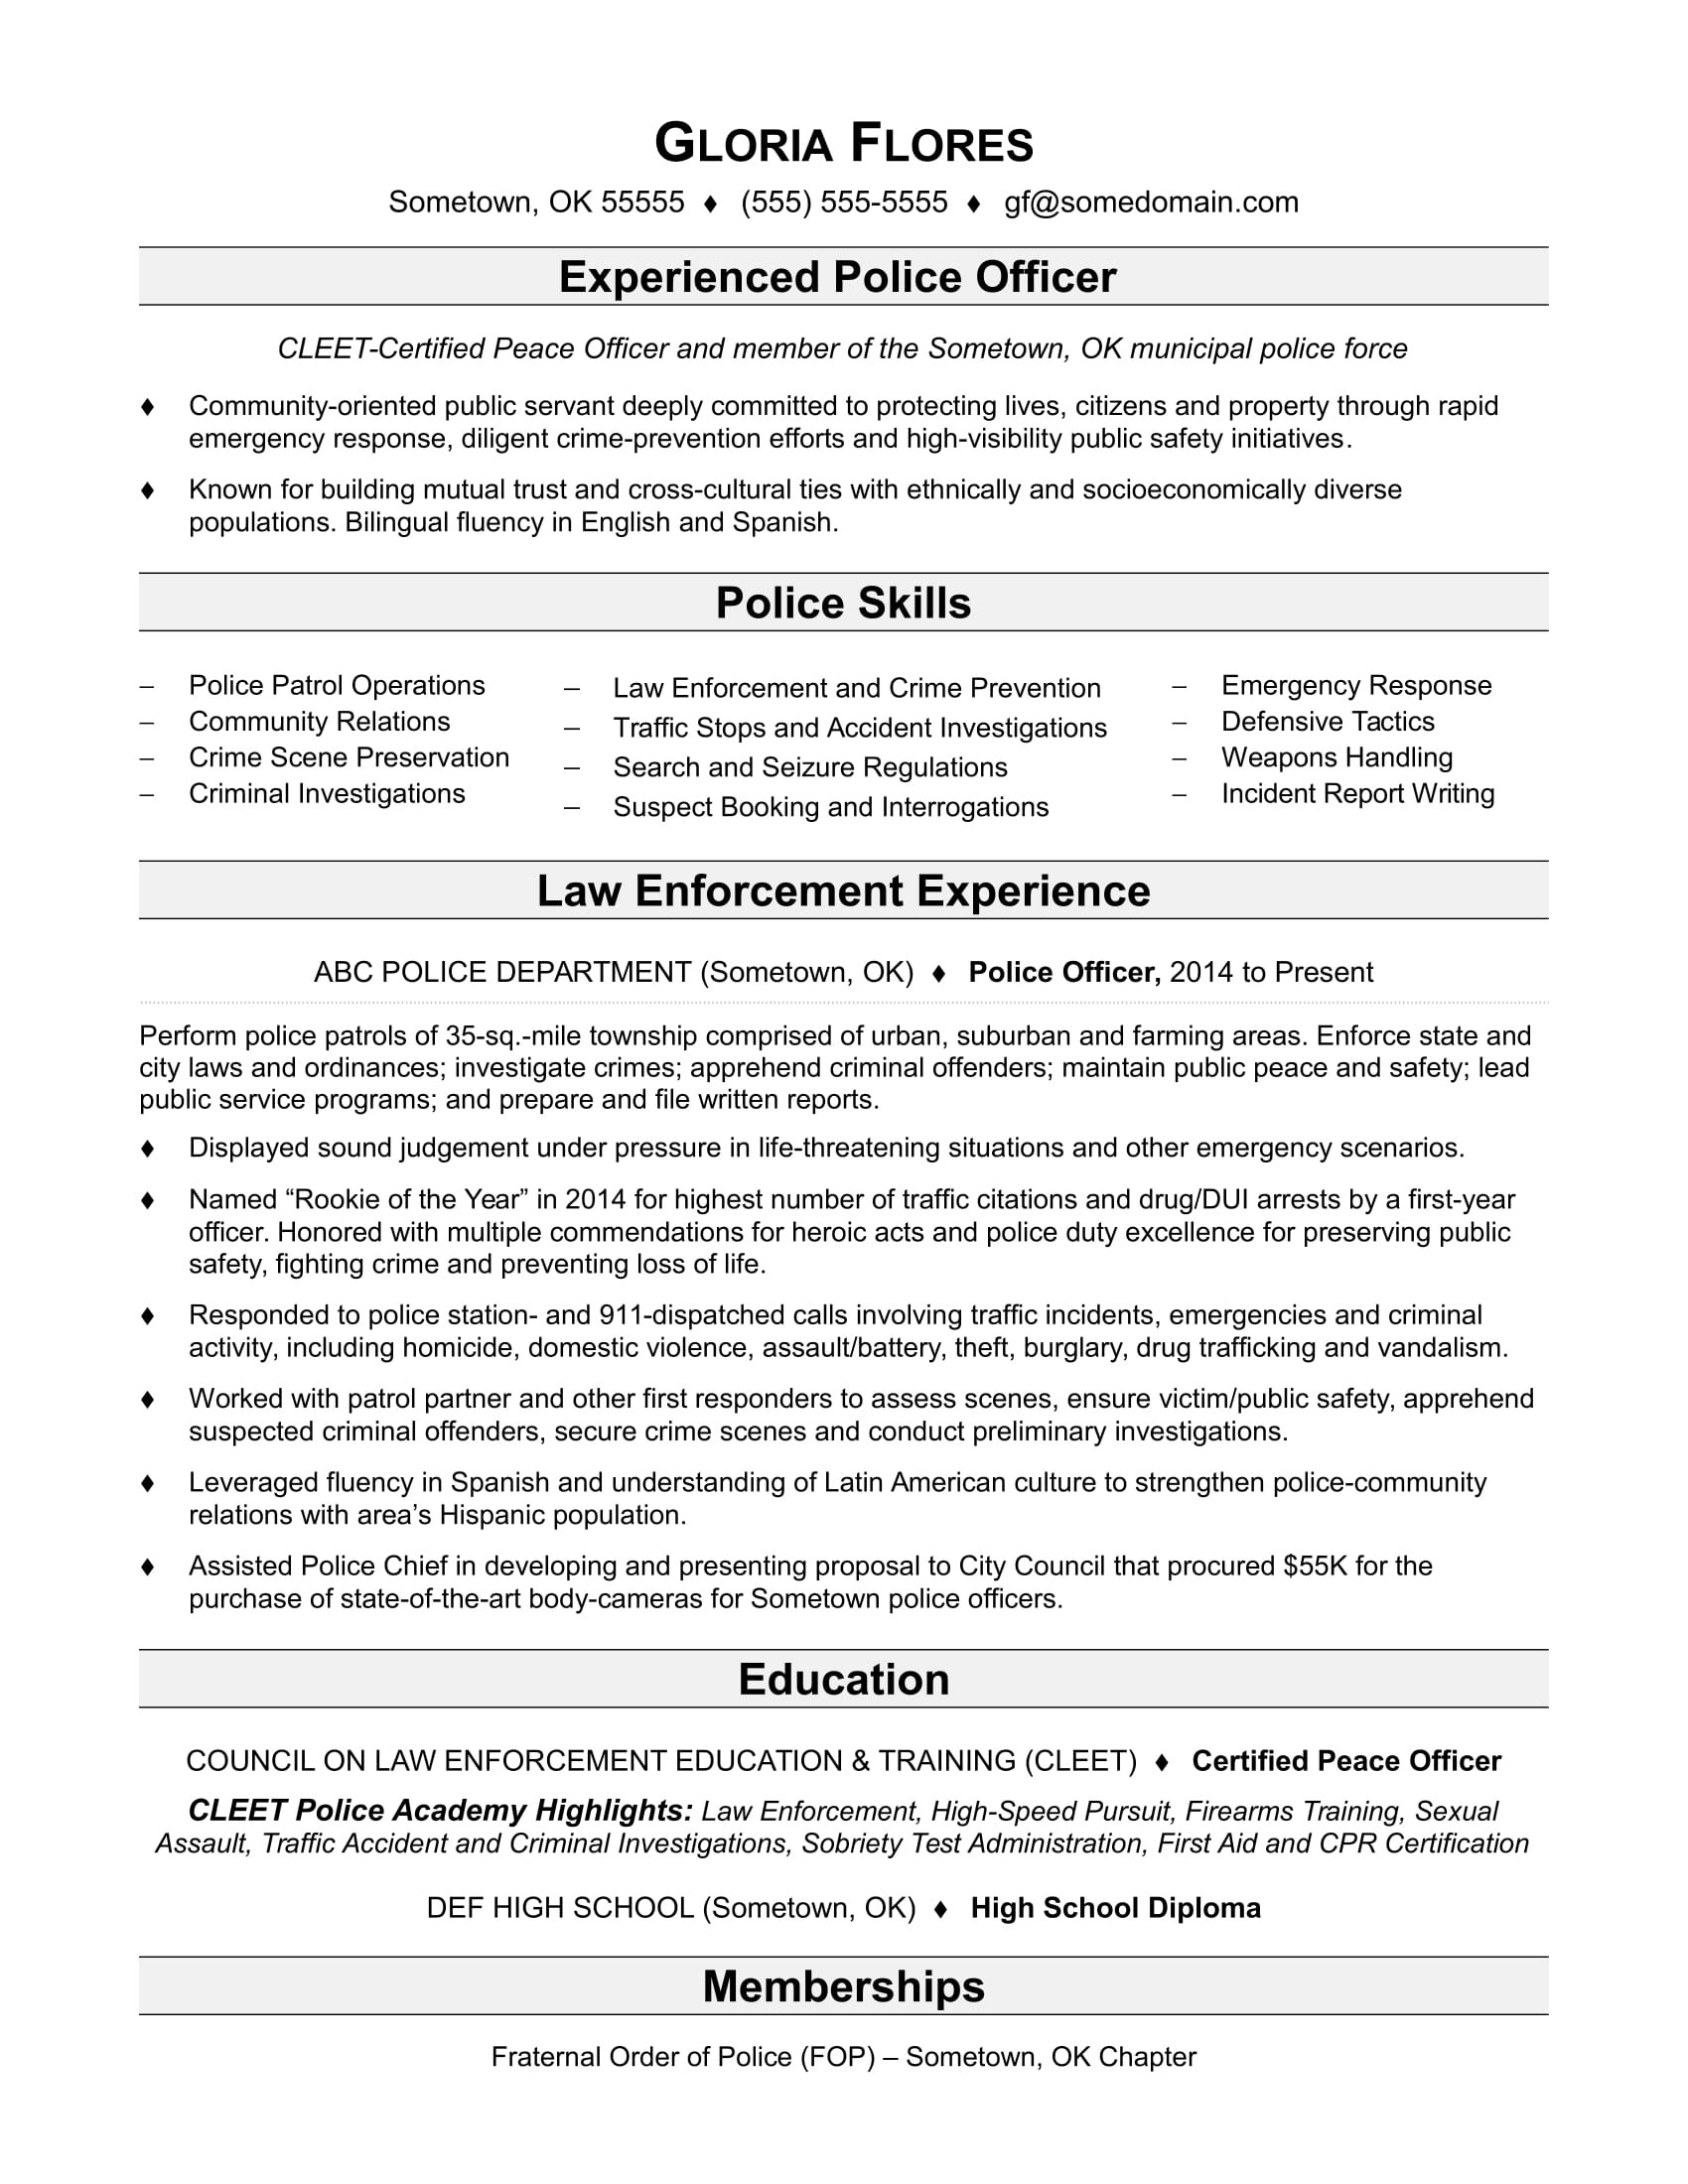 Security Guard Resume Sample In Philippines Police Officer Resume Sample Monster.com